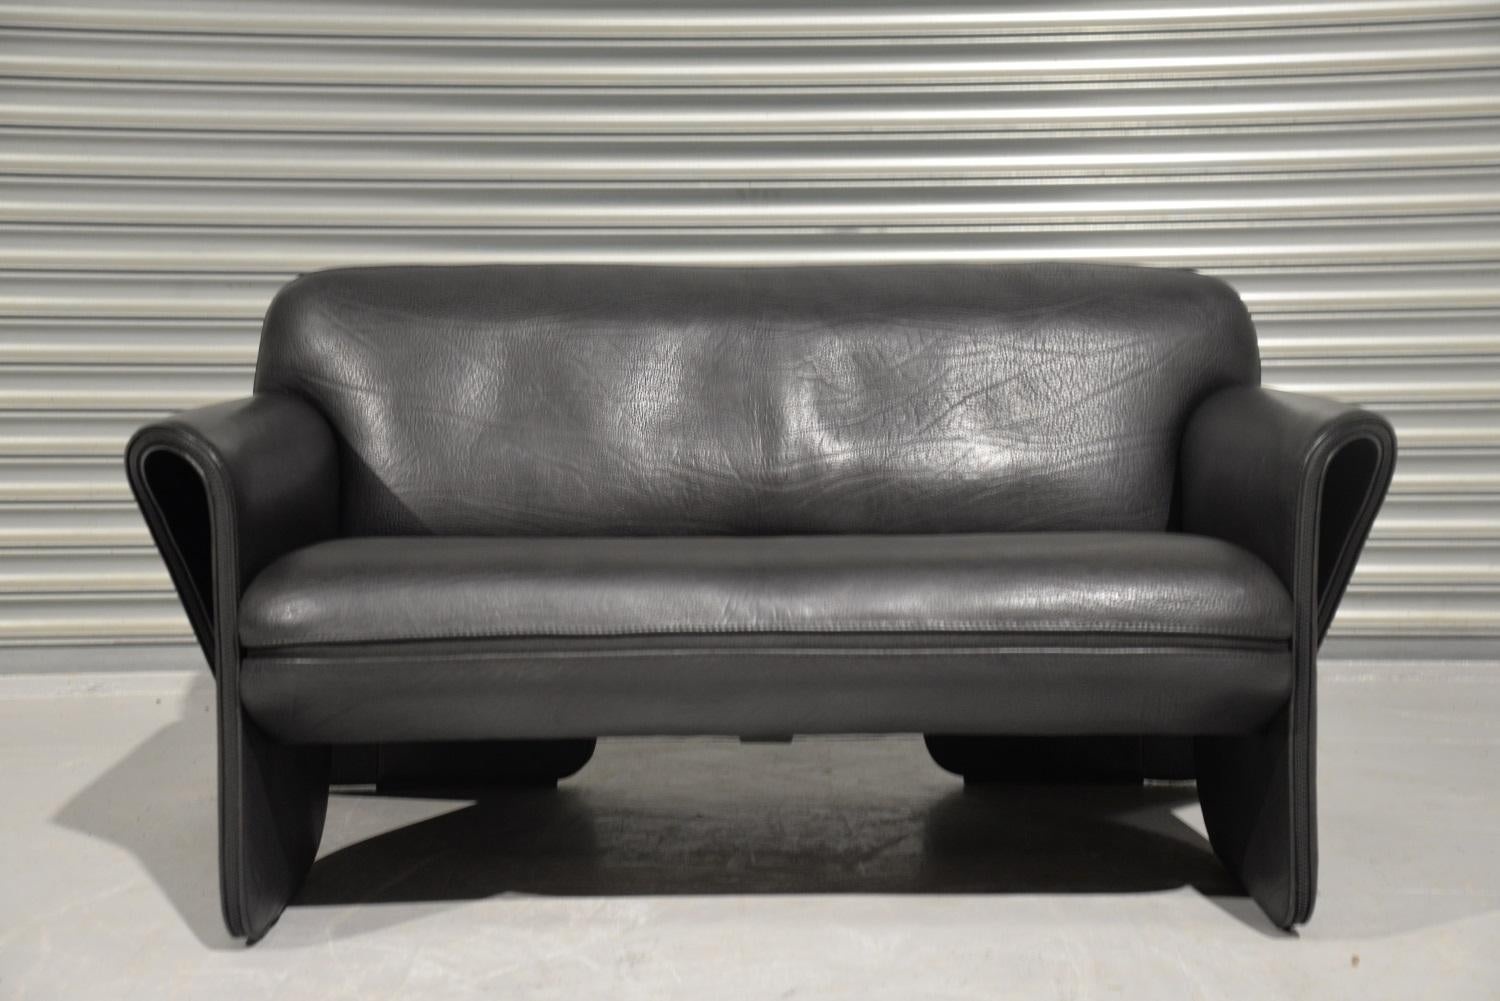 Discounted airfreight for our US and International customers (from 2 weeks door to door)

We bring to you an ultra rare vintage De Sede DS 125 sofa by Gerd Lange in 1978. These sculptural pieces are upholstered in 3mm-5mm thick black neck leather